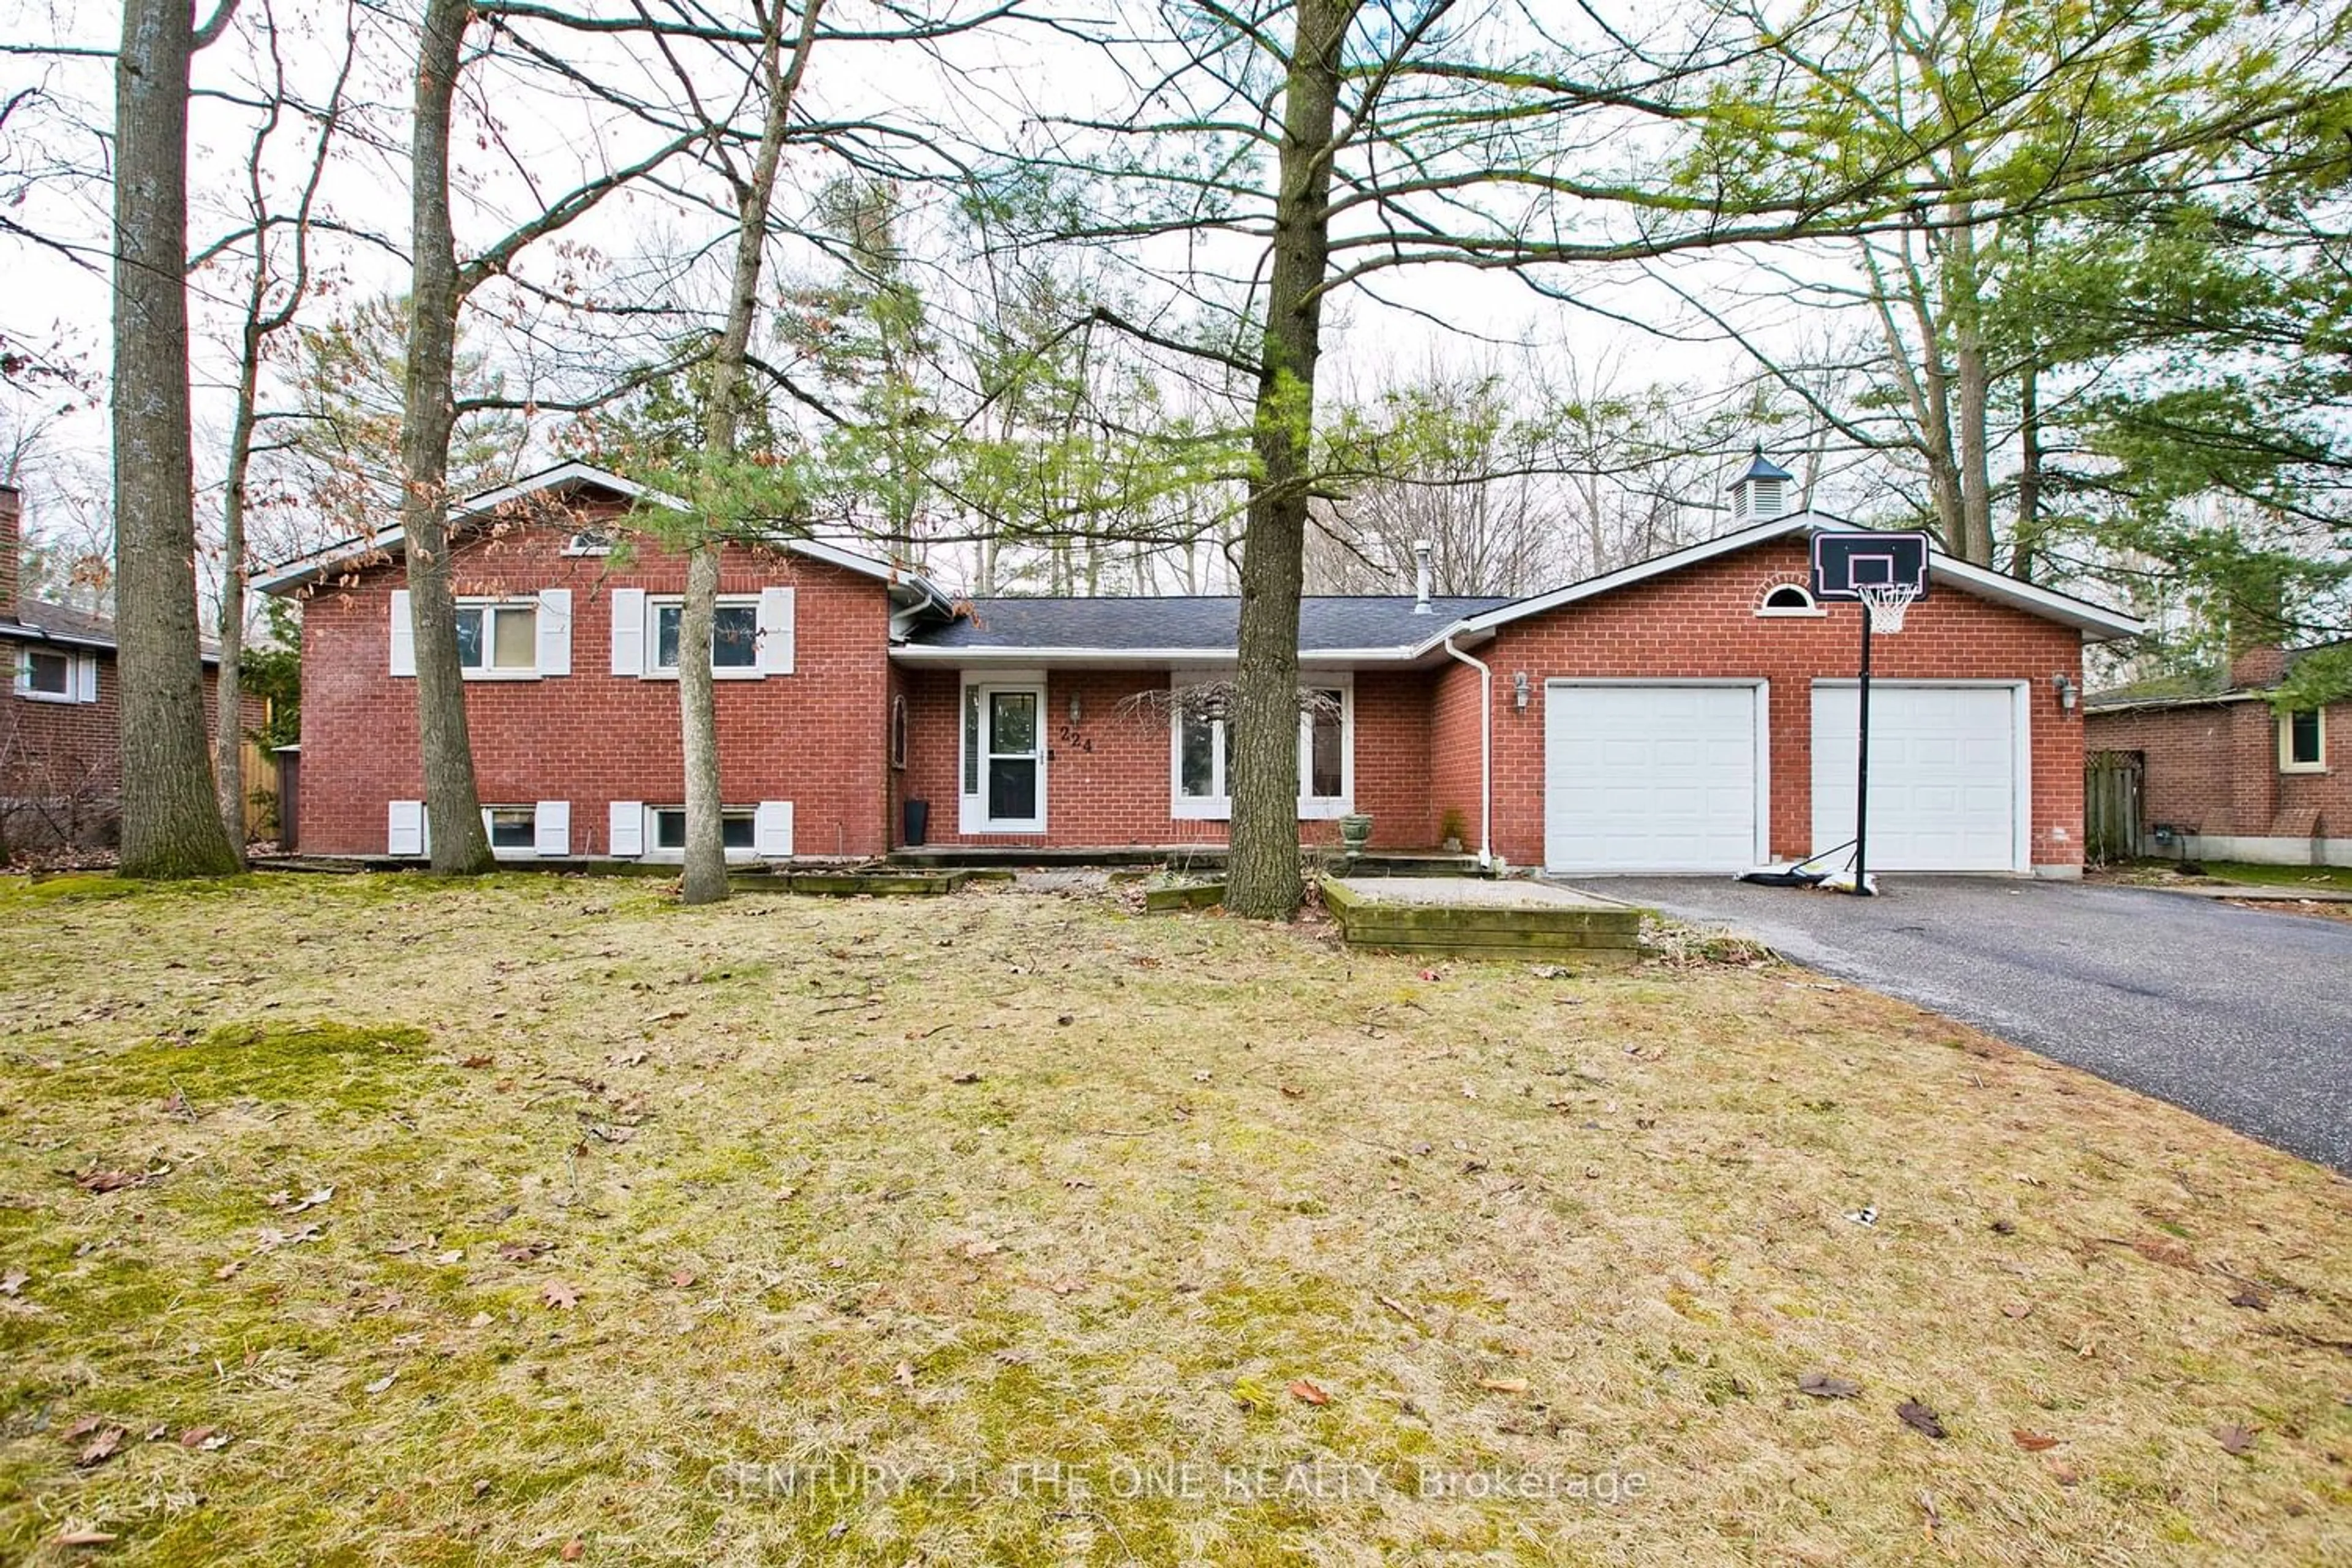 Home with brick exterior material for 224 Park Ave, East Gwillimbury Ontario L9N 1J9